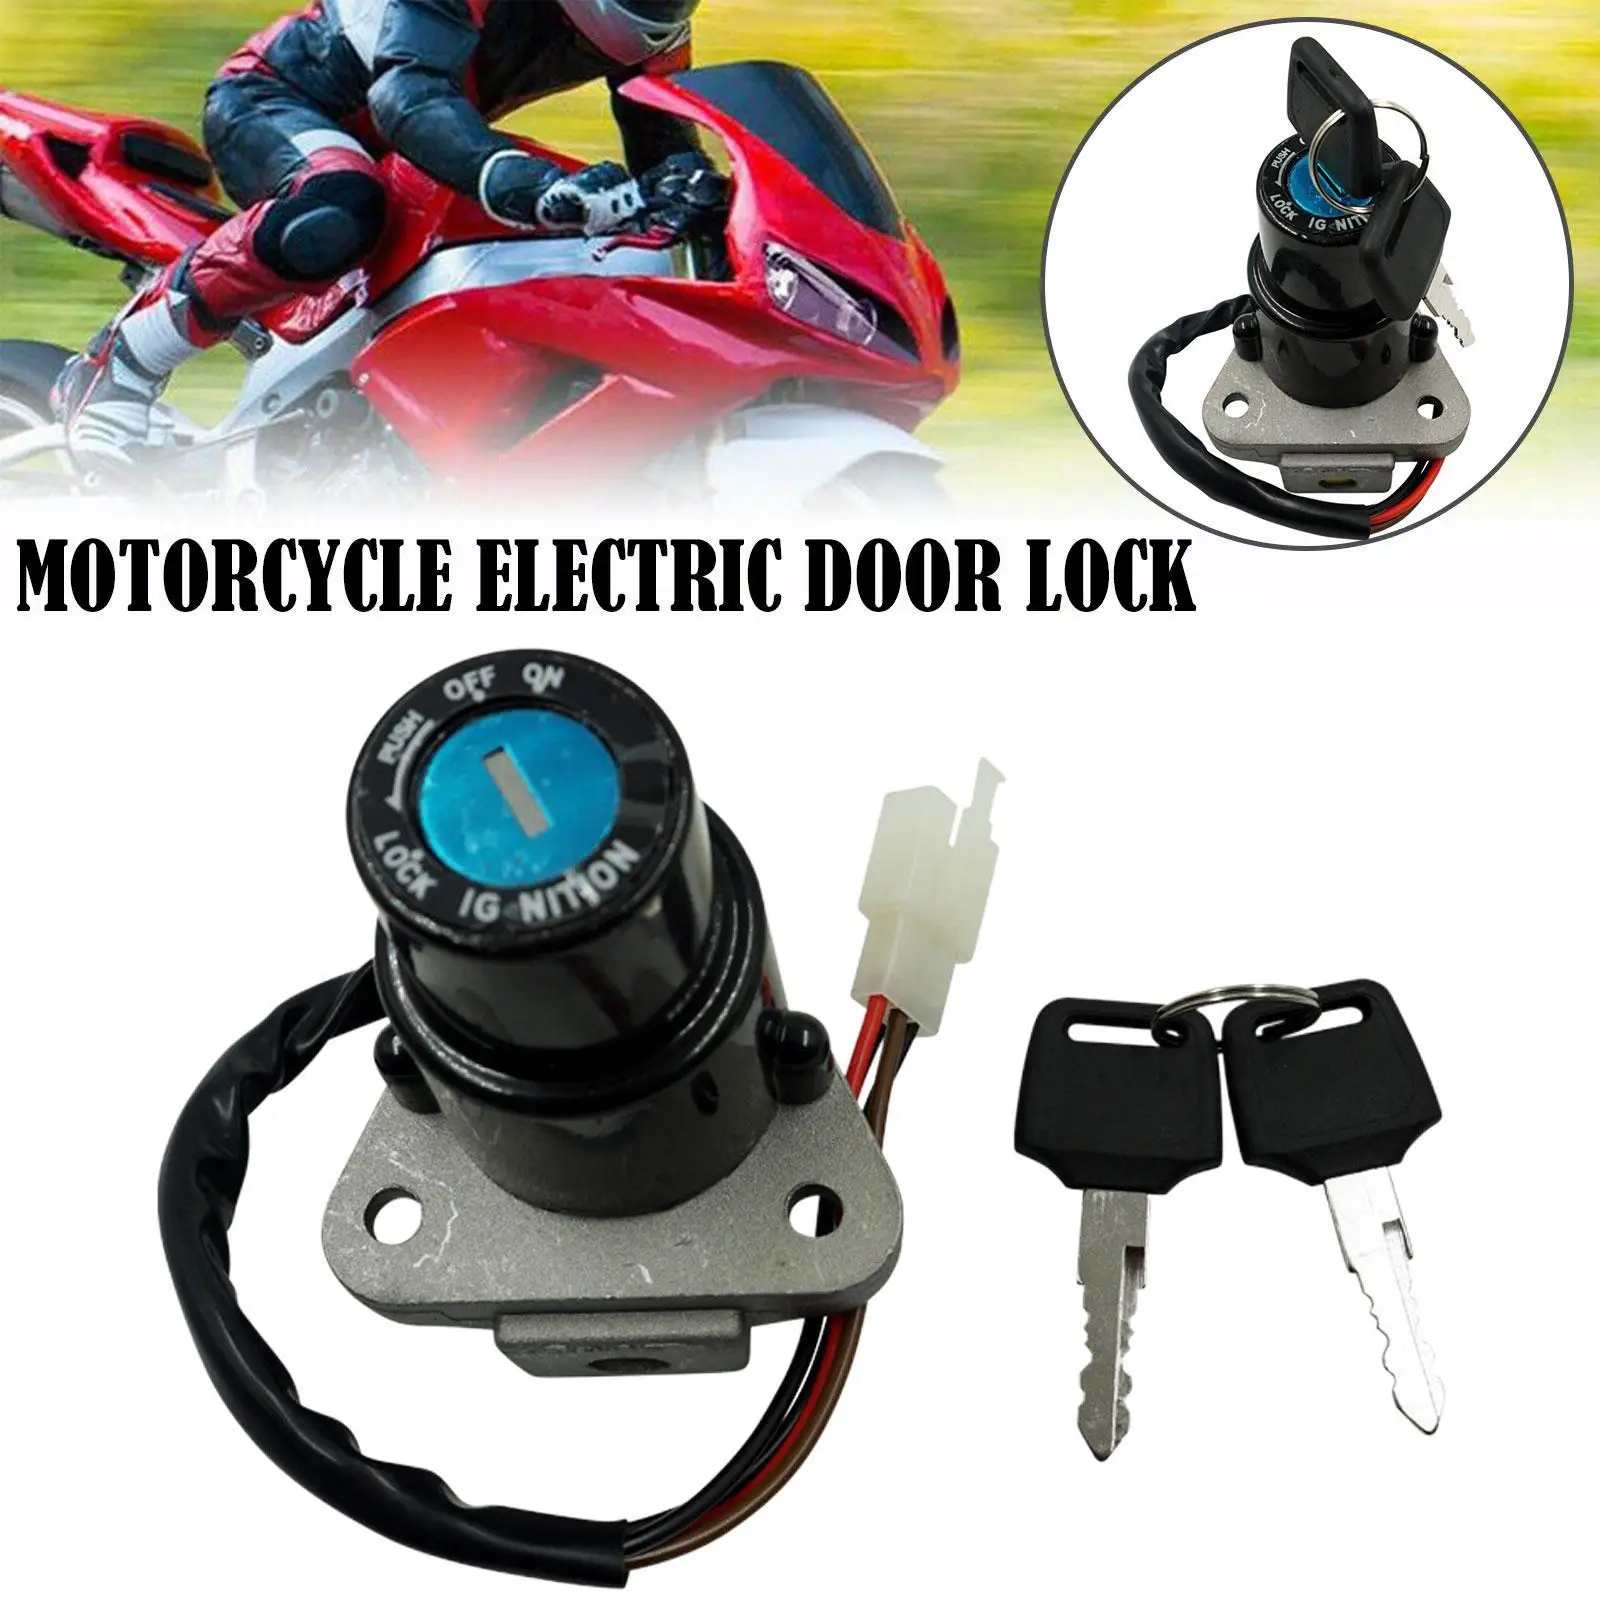 

Universal Motorcycle Motorbike Ignition Switch Key Electric Door Lock Fit for YAMAHA DT125 TW225 ATV Moto Accessories with Wire